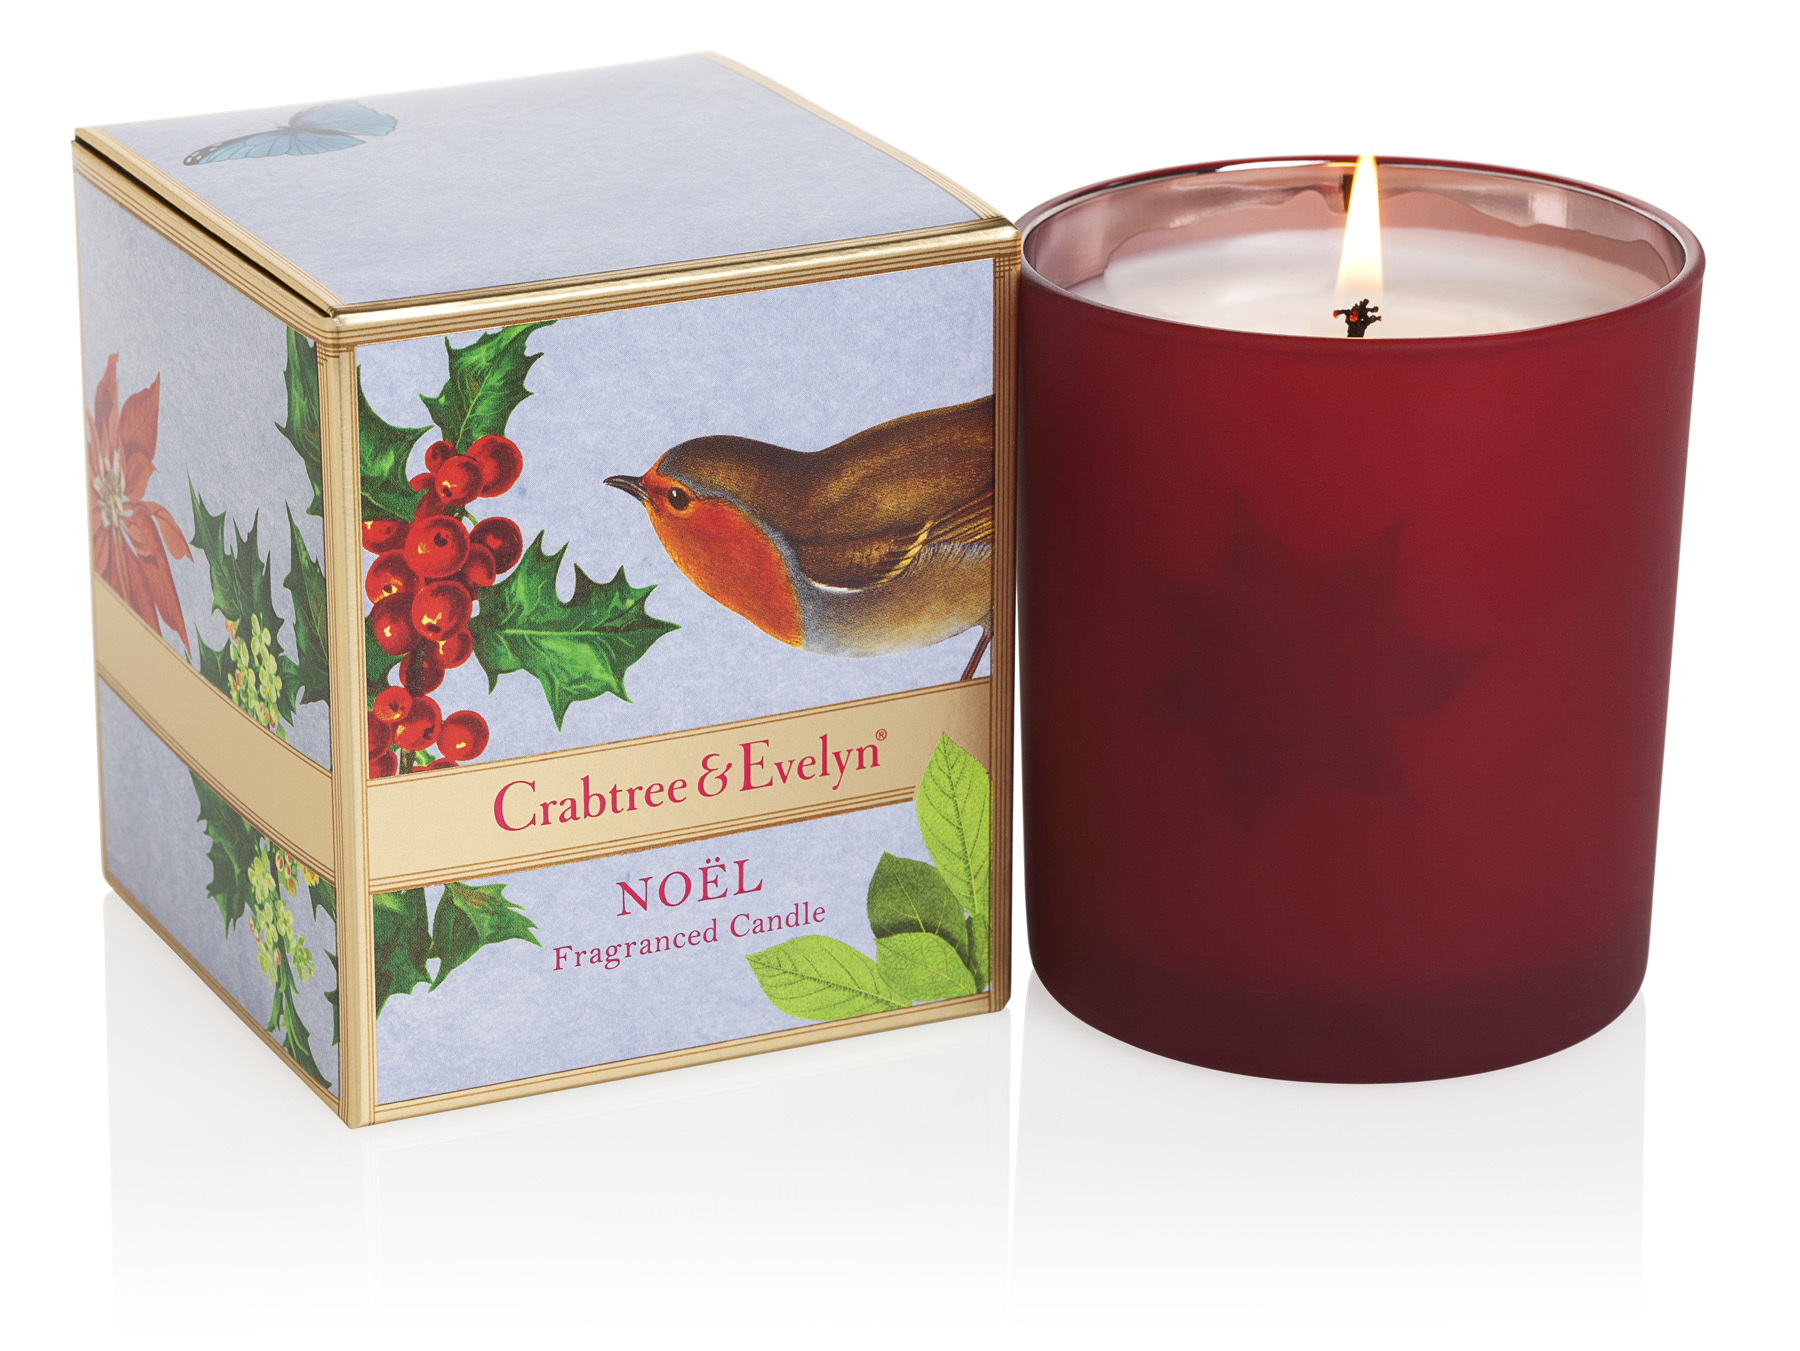 7oz  Discontinued Crabtree & Evelyn Noel Large Candle 200g